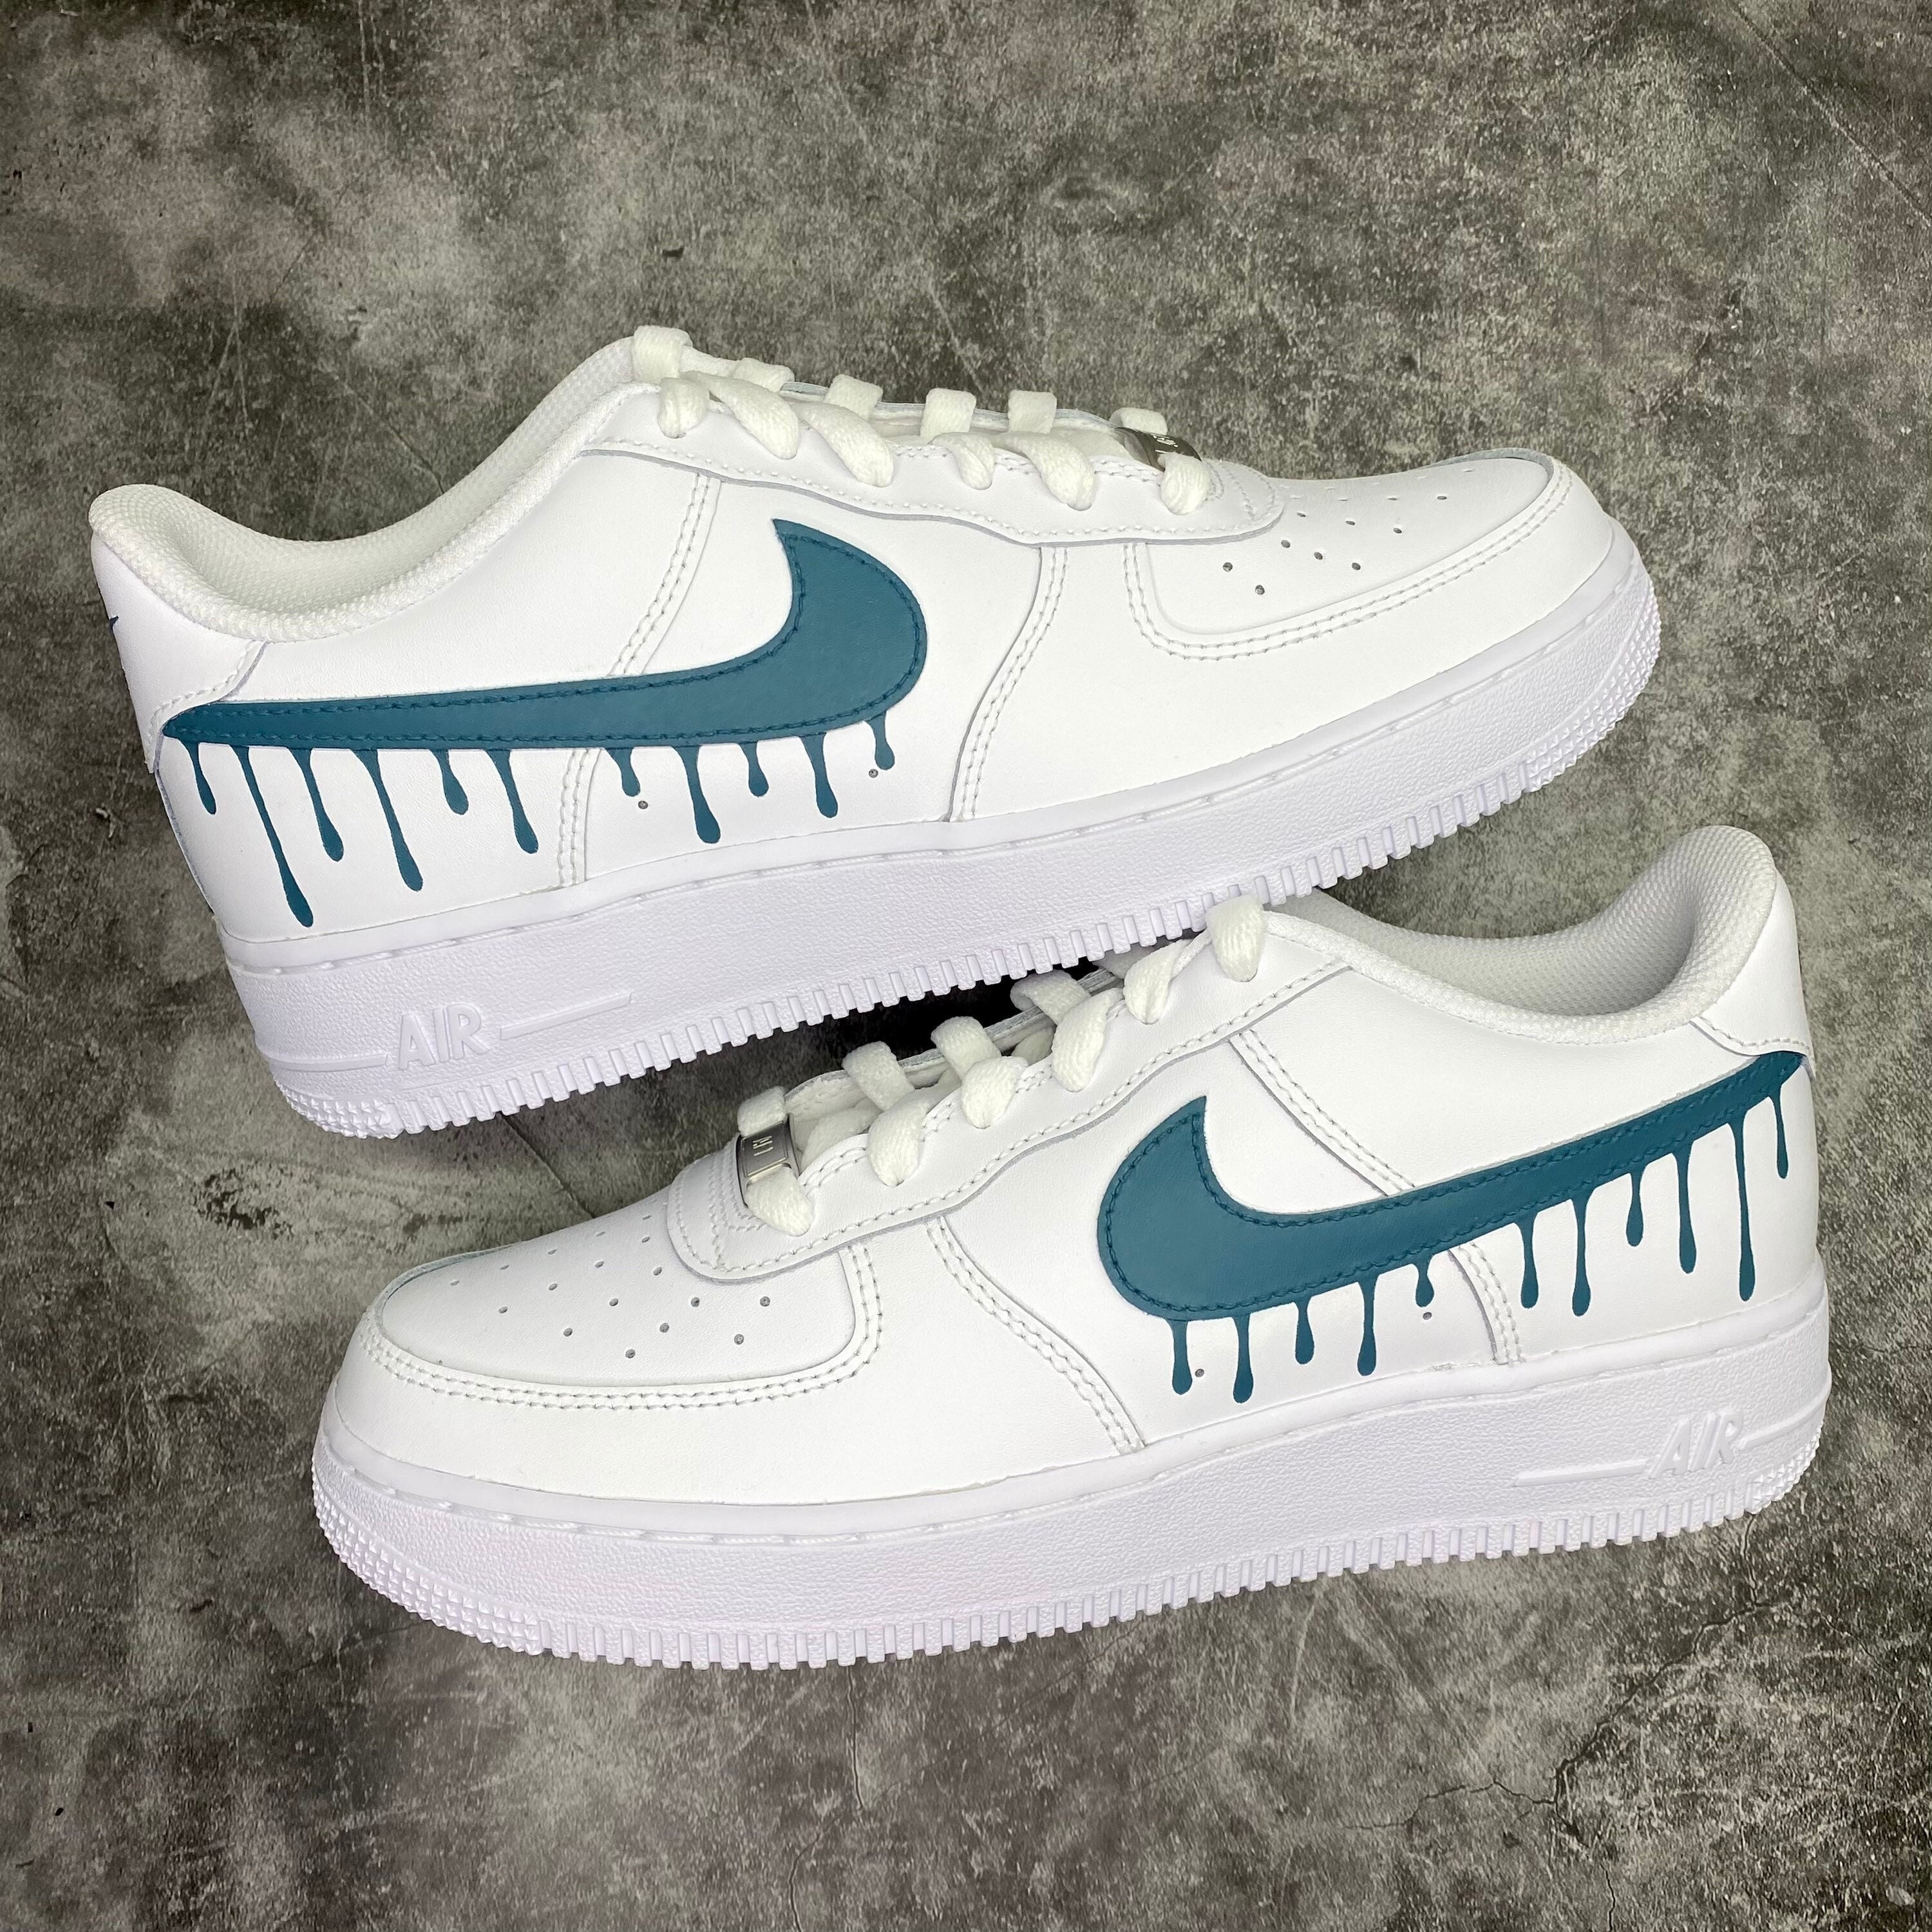 Guide to Customize Your Nike Air Force 1 AF1s sneakers